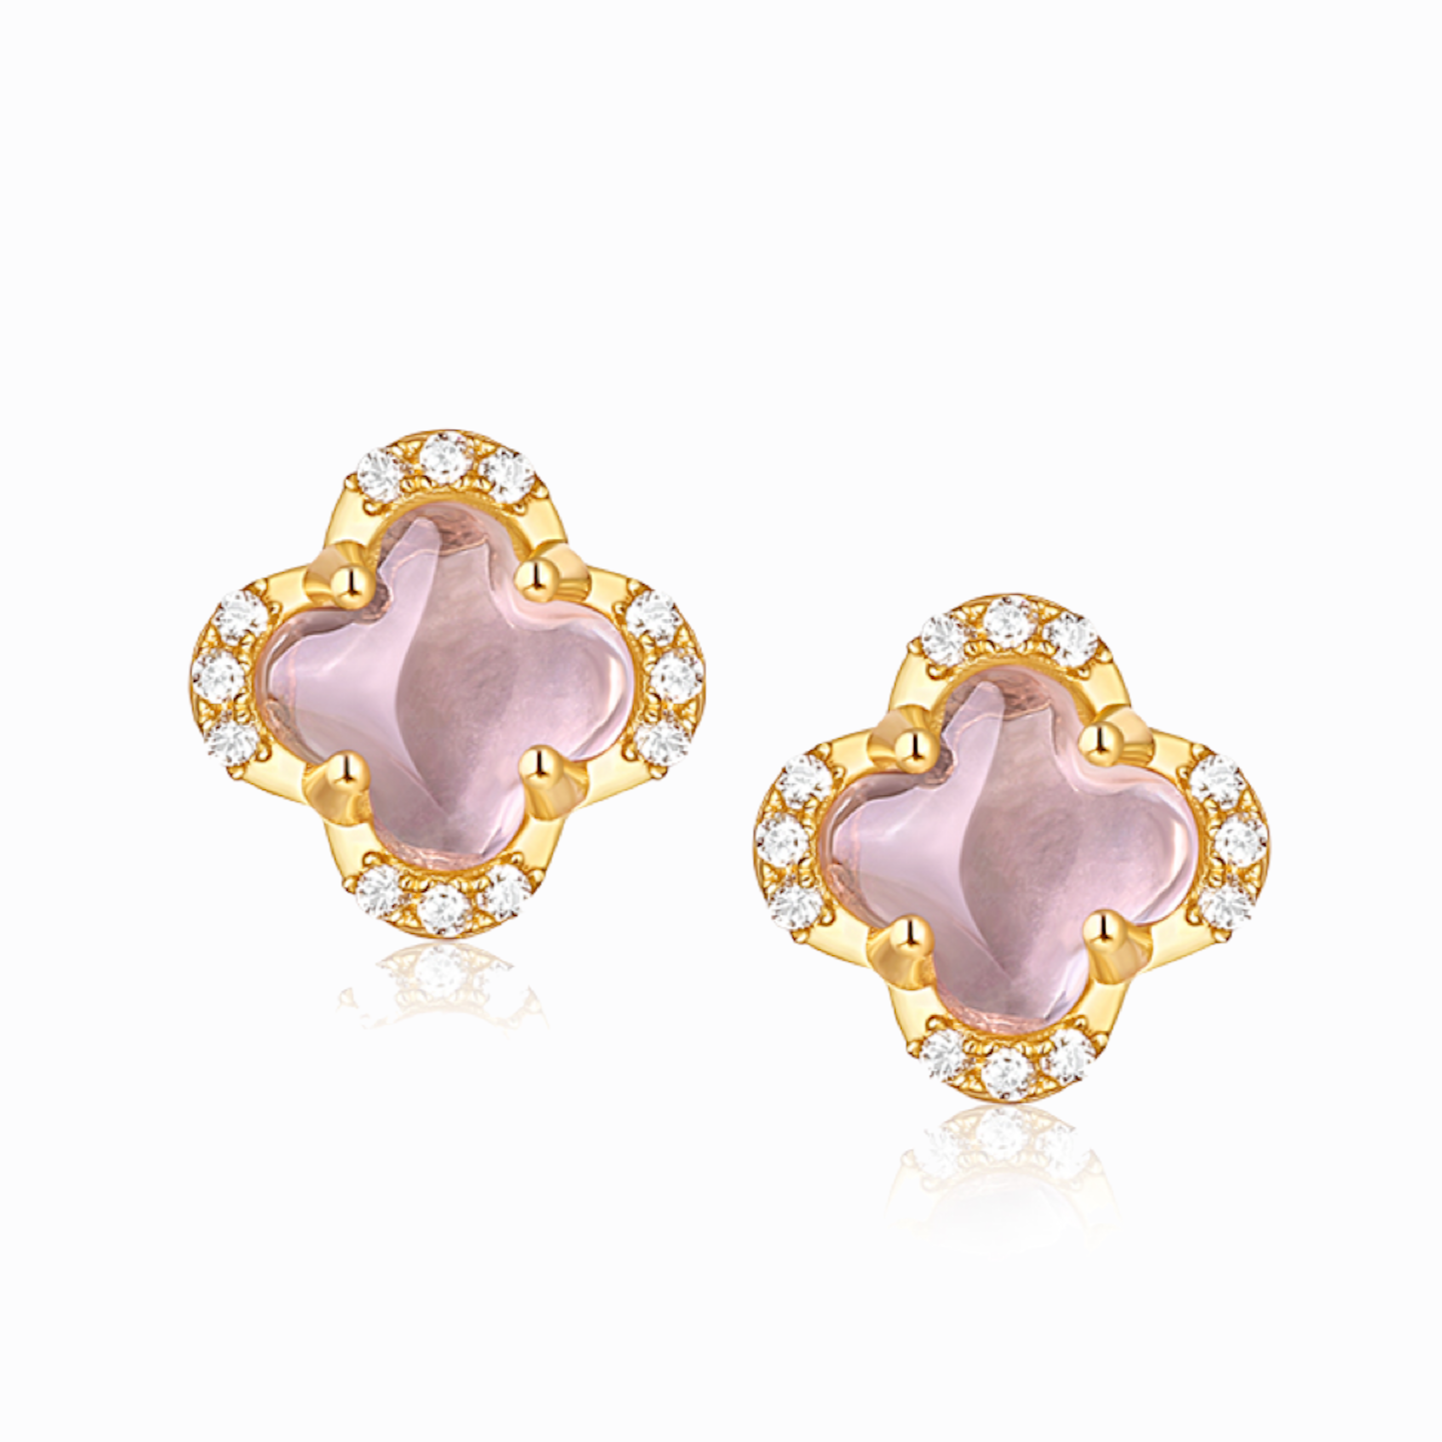 Four Leaf Clover Earrings, 14ct Gold Plate